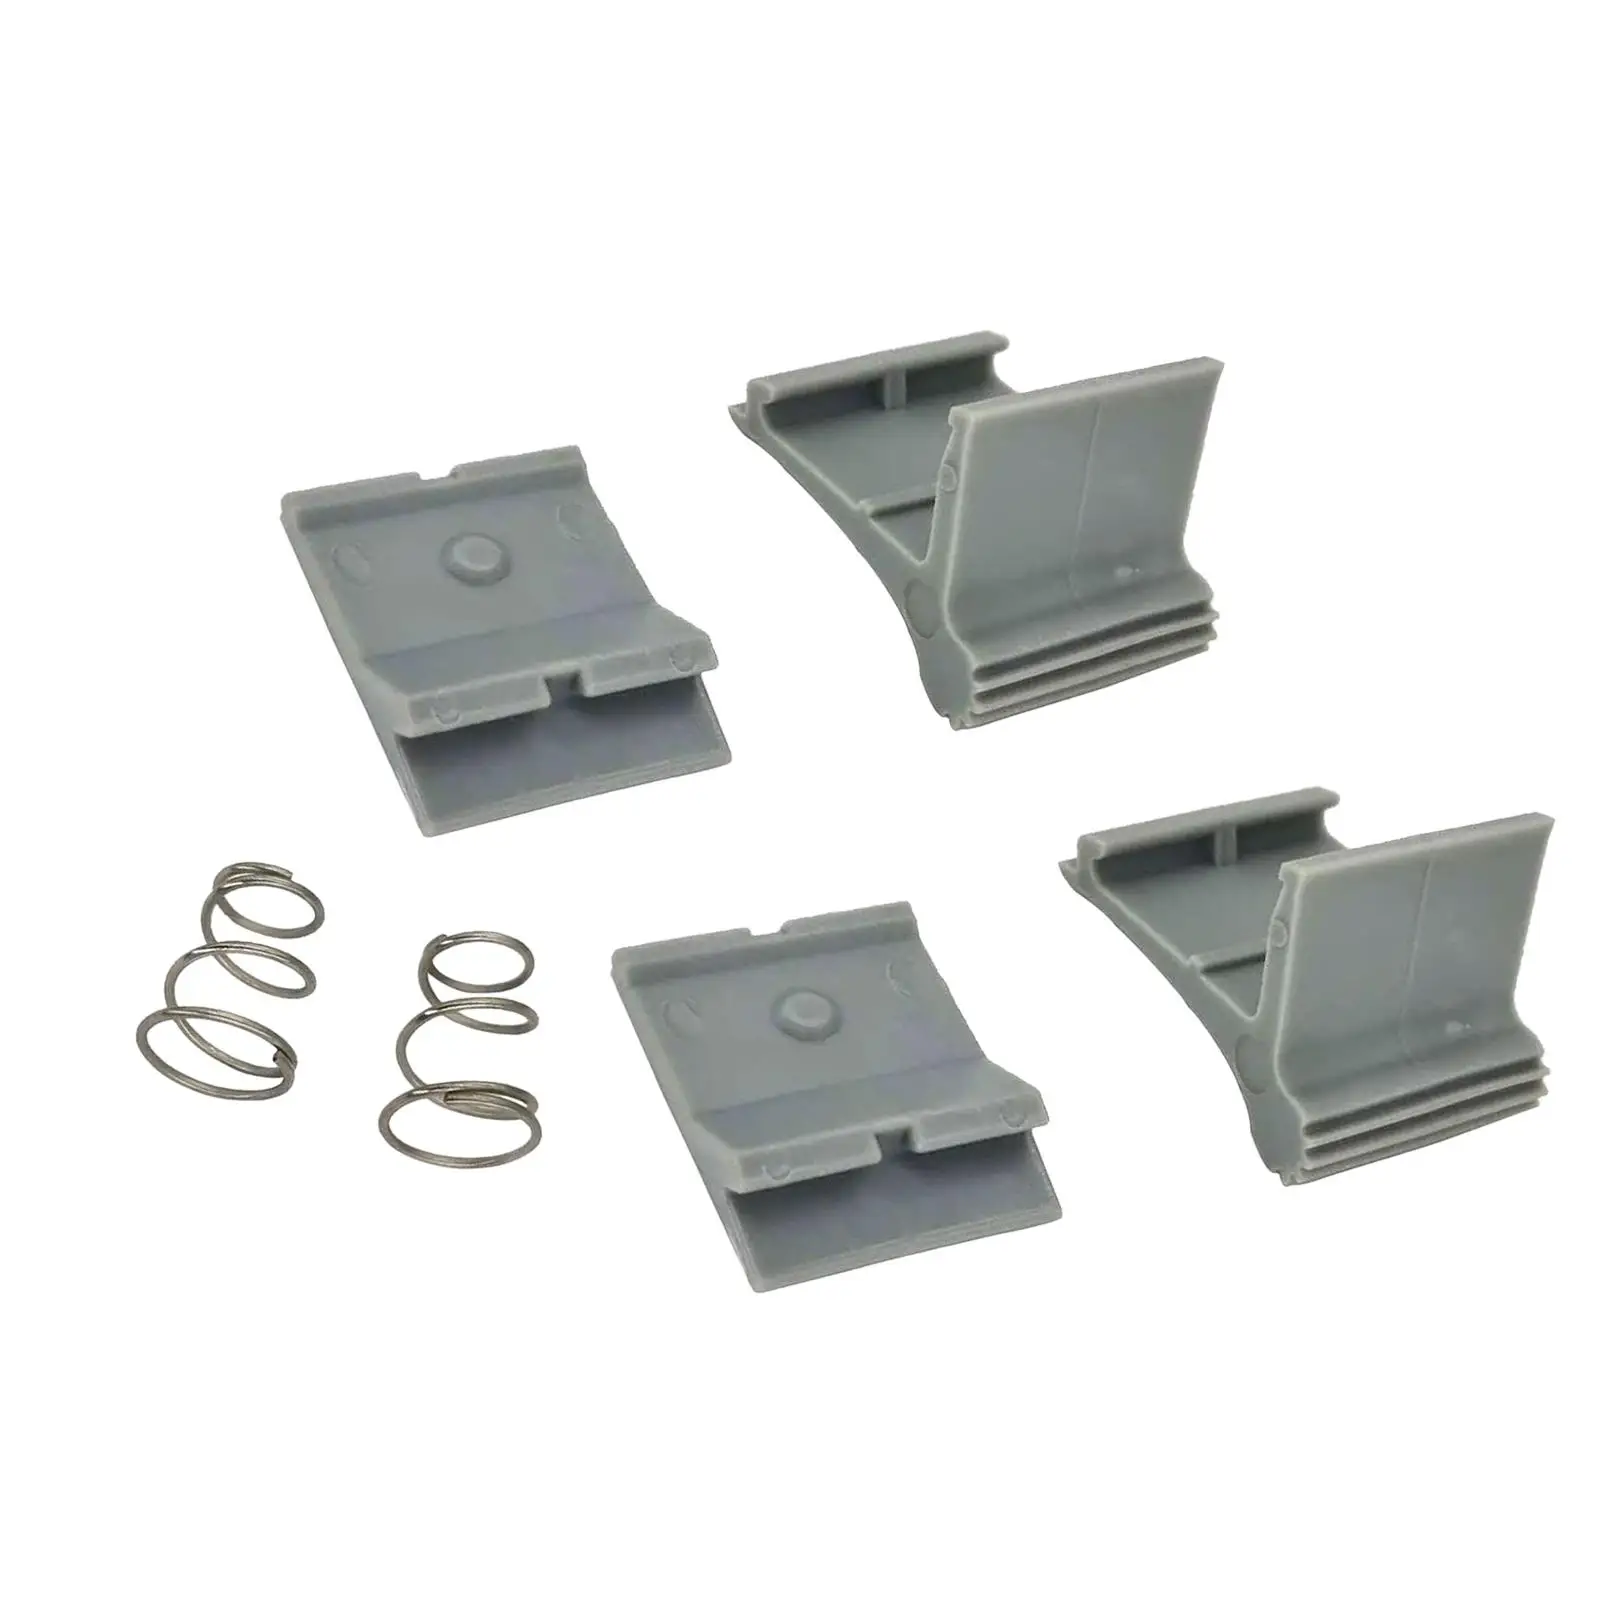 Awning Arm Slider Catch Set with 2 Springs Repair Parts Durable Assembly Replaces Easy Installation for Trailer Camper RV